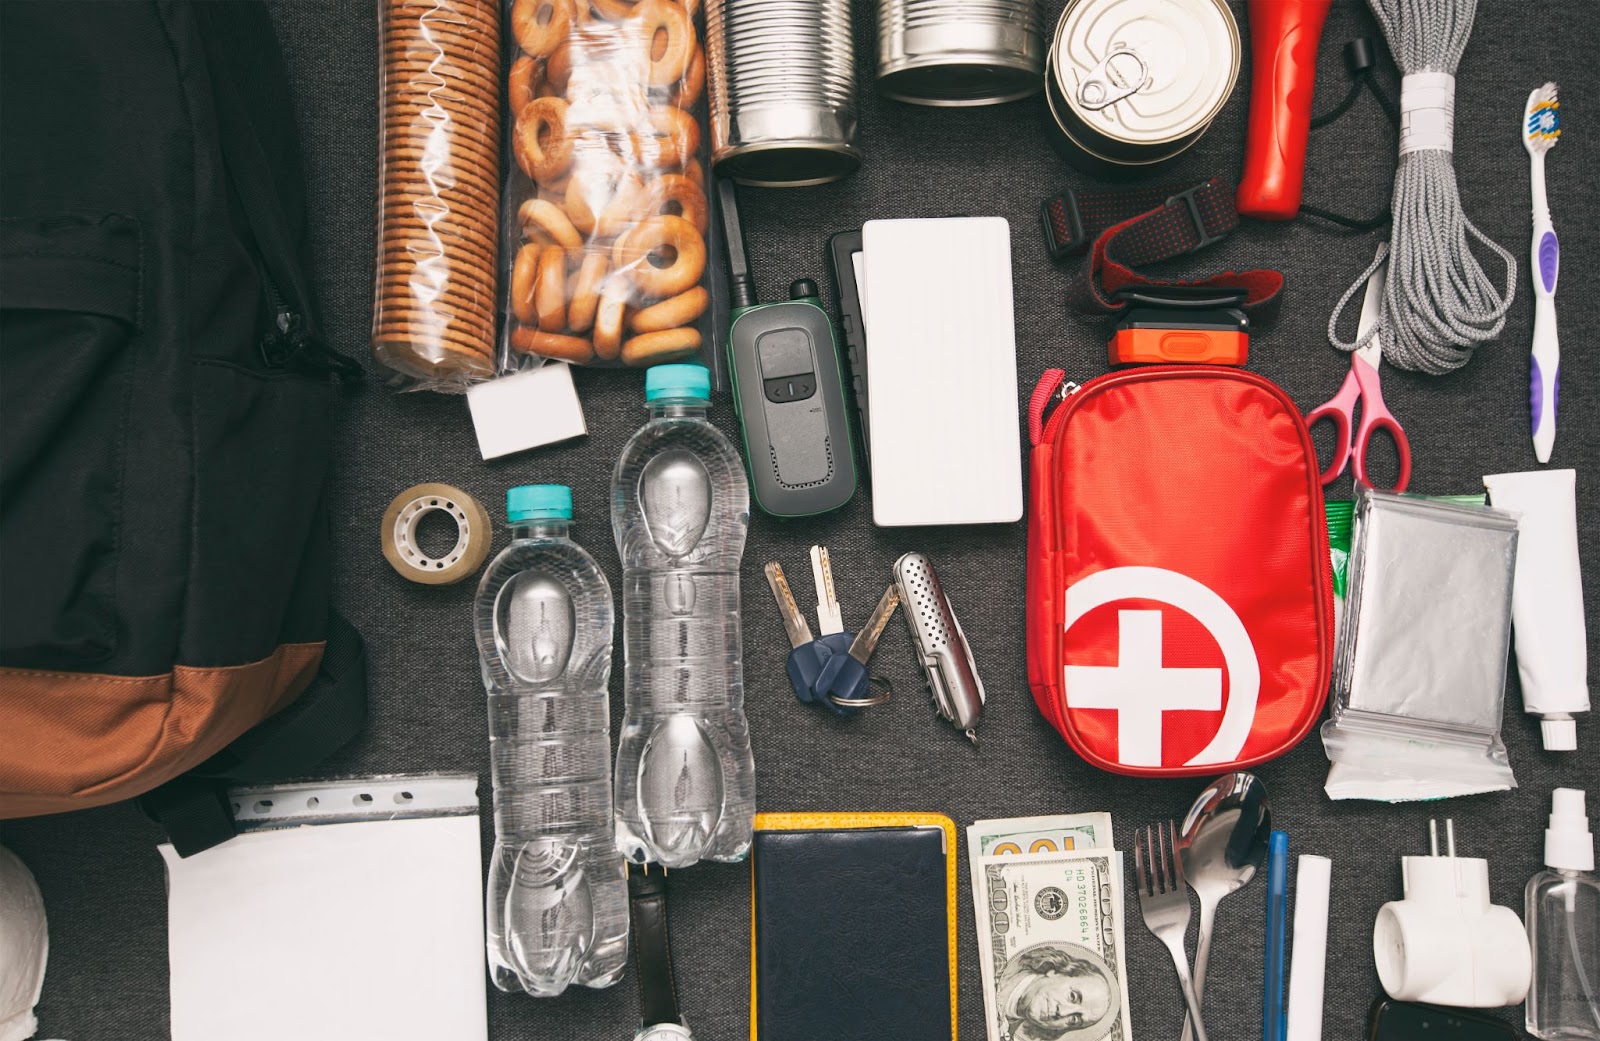 A disaster preparedness kit on a table backpack, water bottle, and other essential items for preparing for a disaster.